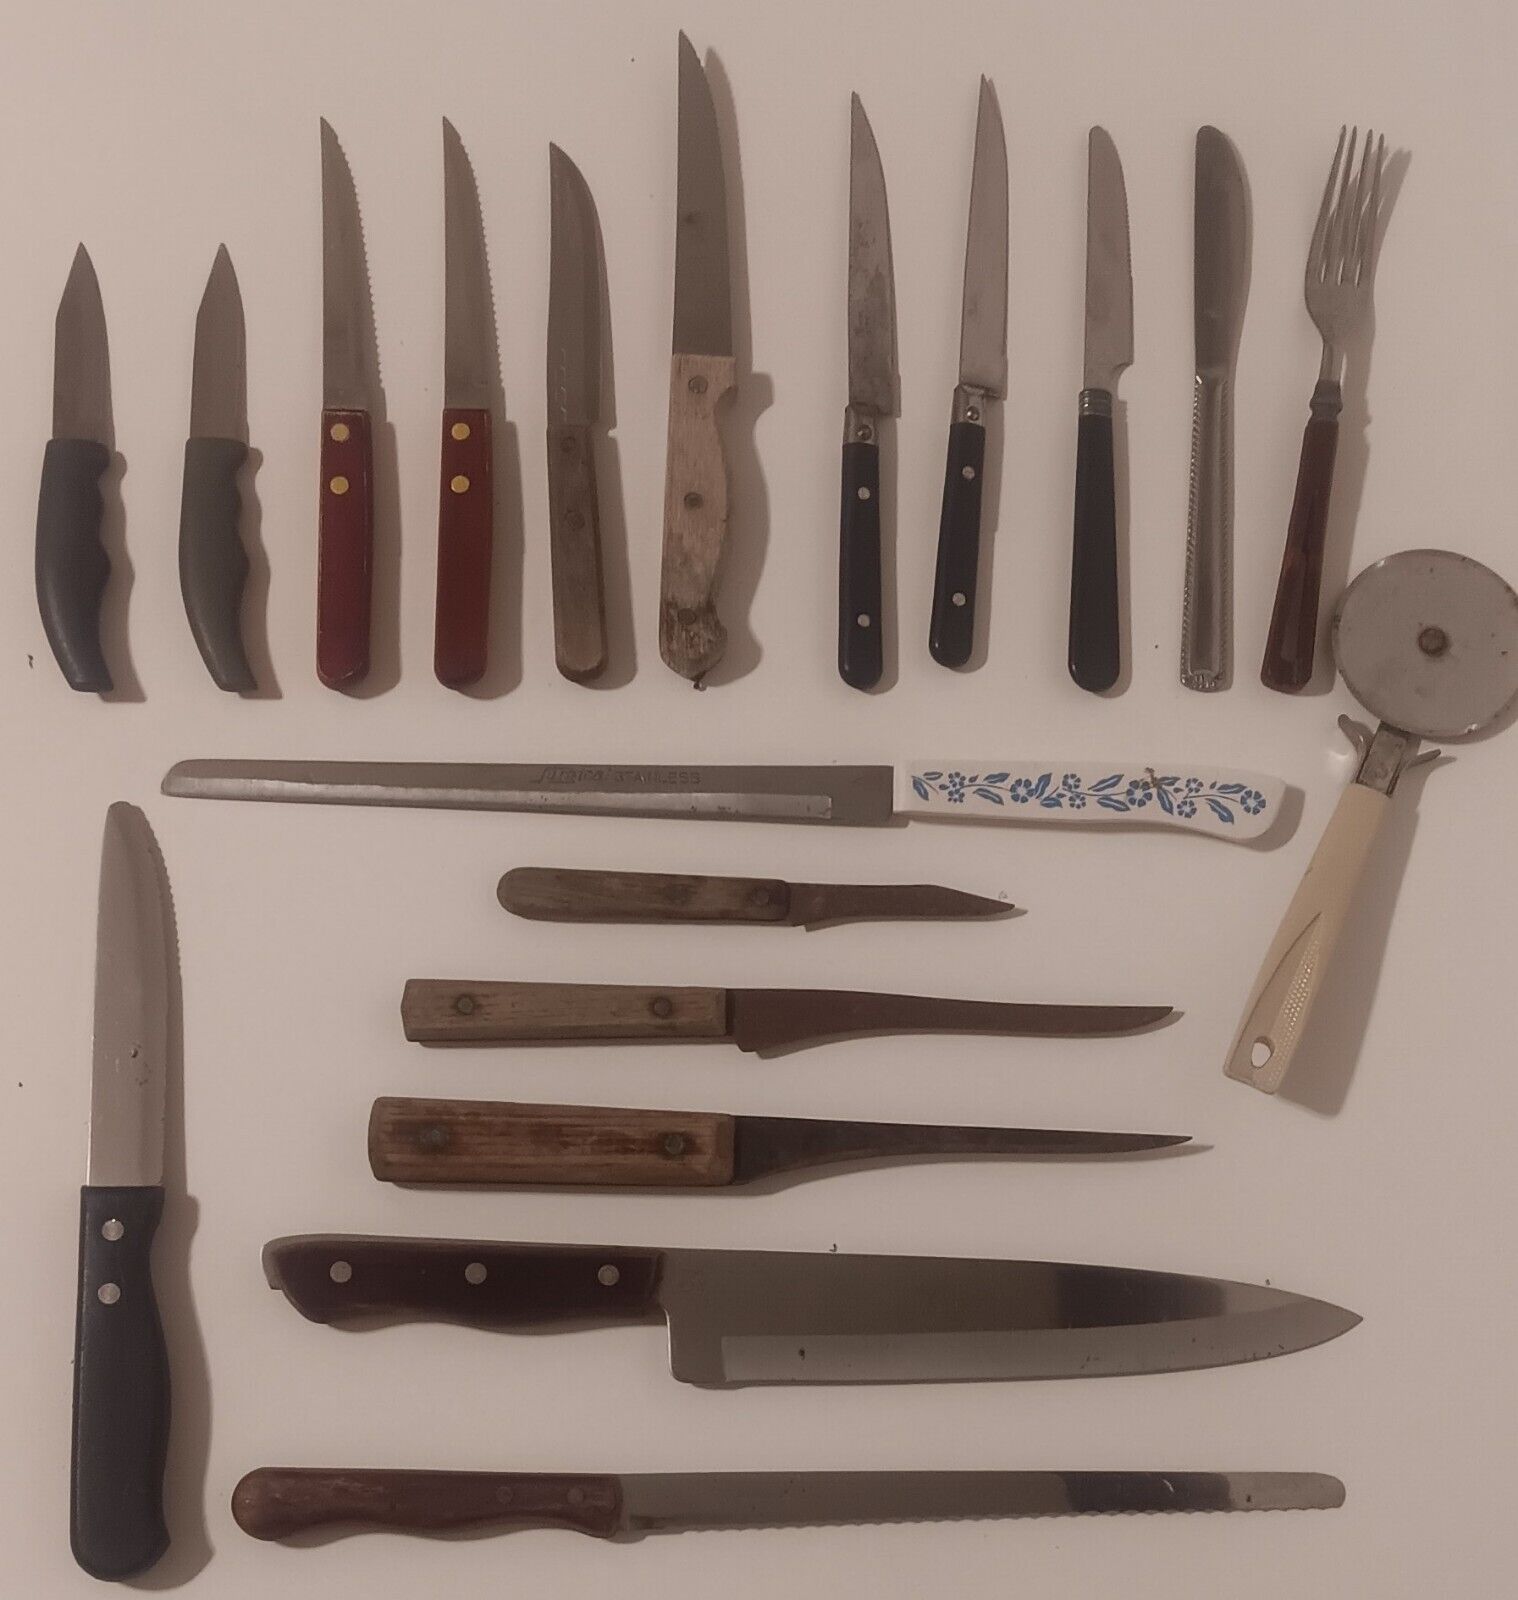 17 Old Vintage Knives, 1 Pizza Cutter And 1 Fork